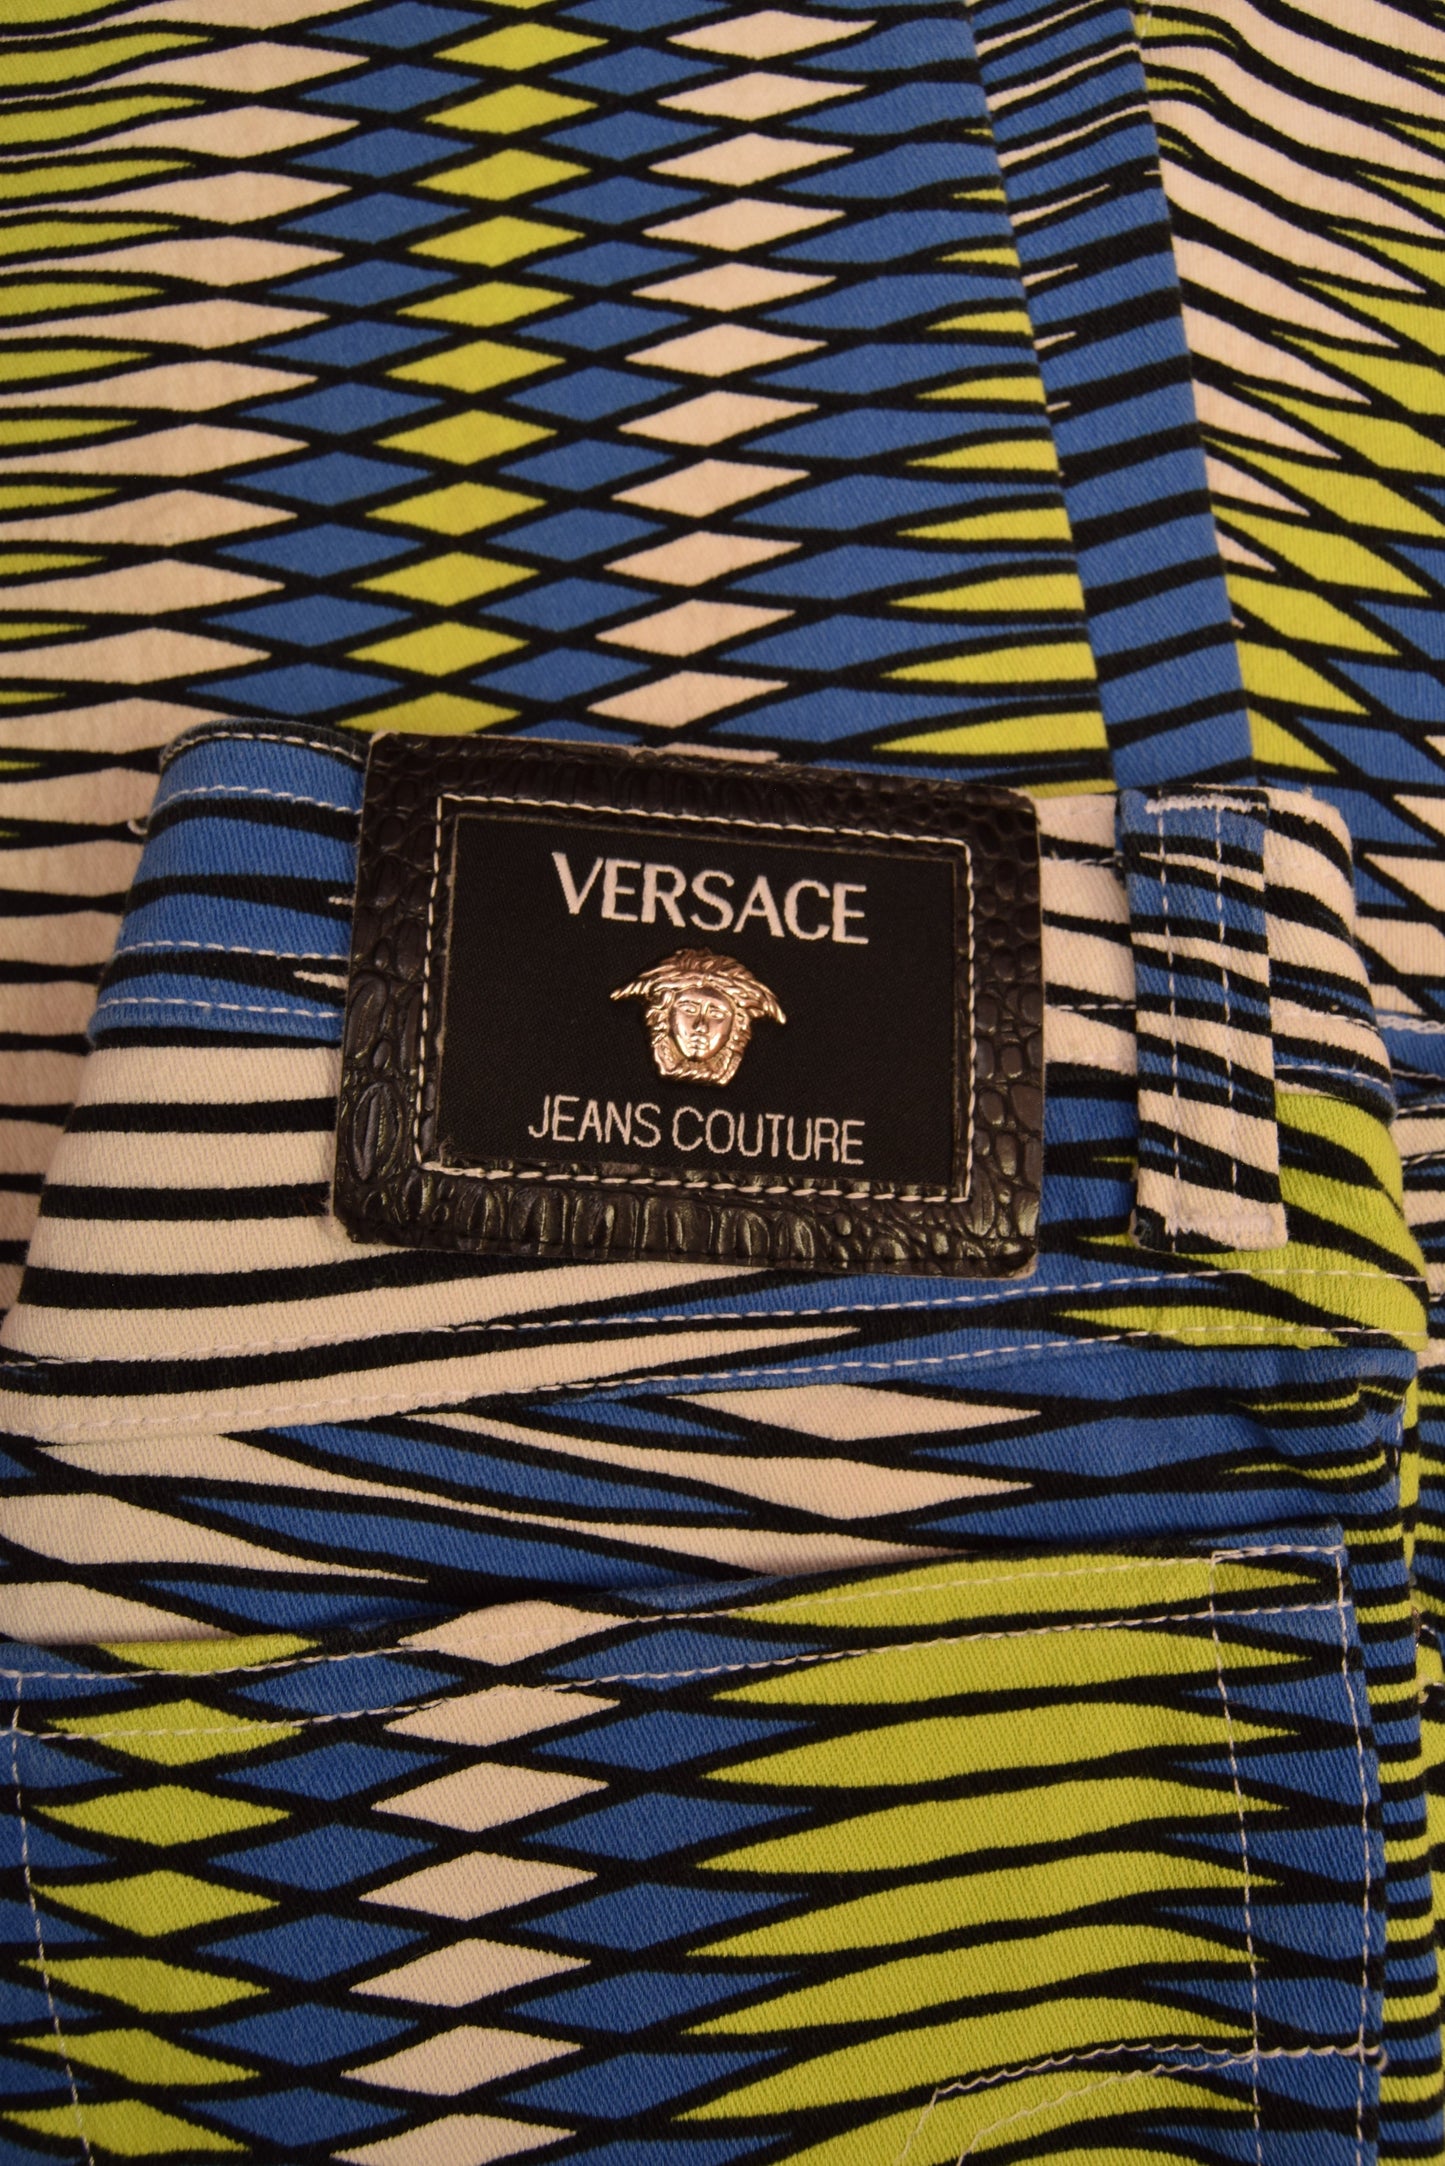 90's Versace Jeans Couture Opt Art Psyhadelic Geometric Stretch Made in Italy High Waist Ittierre